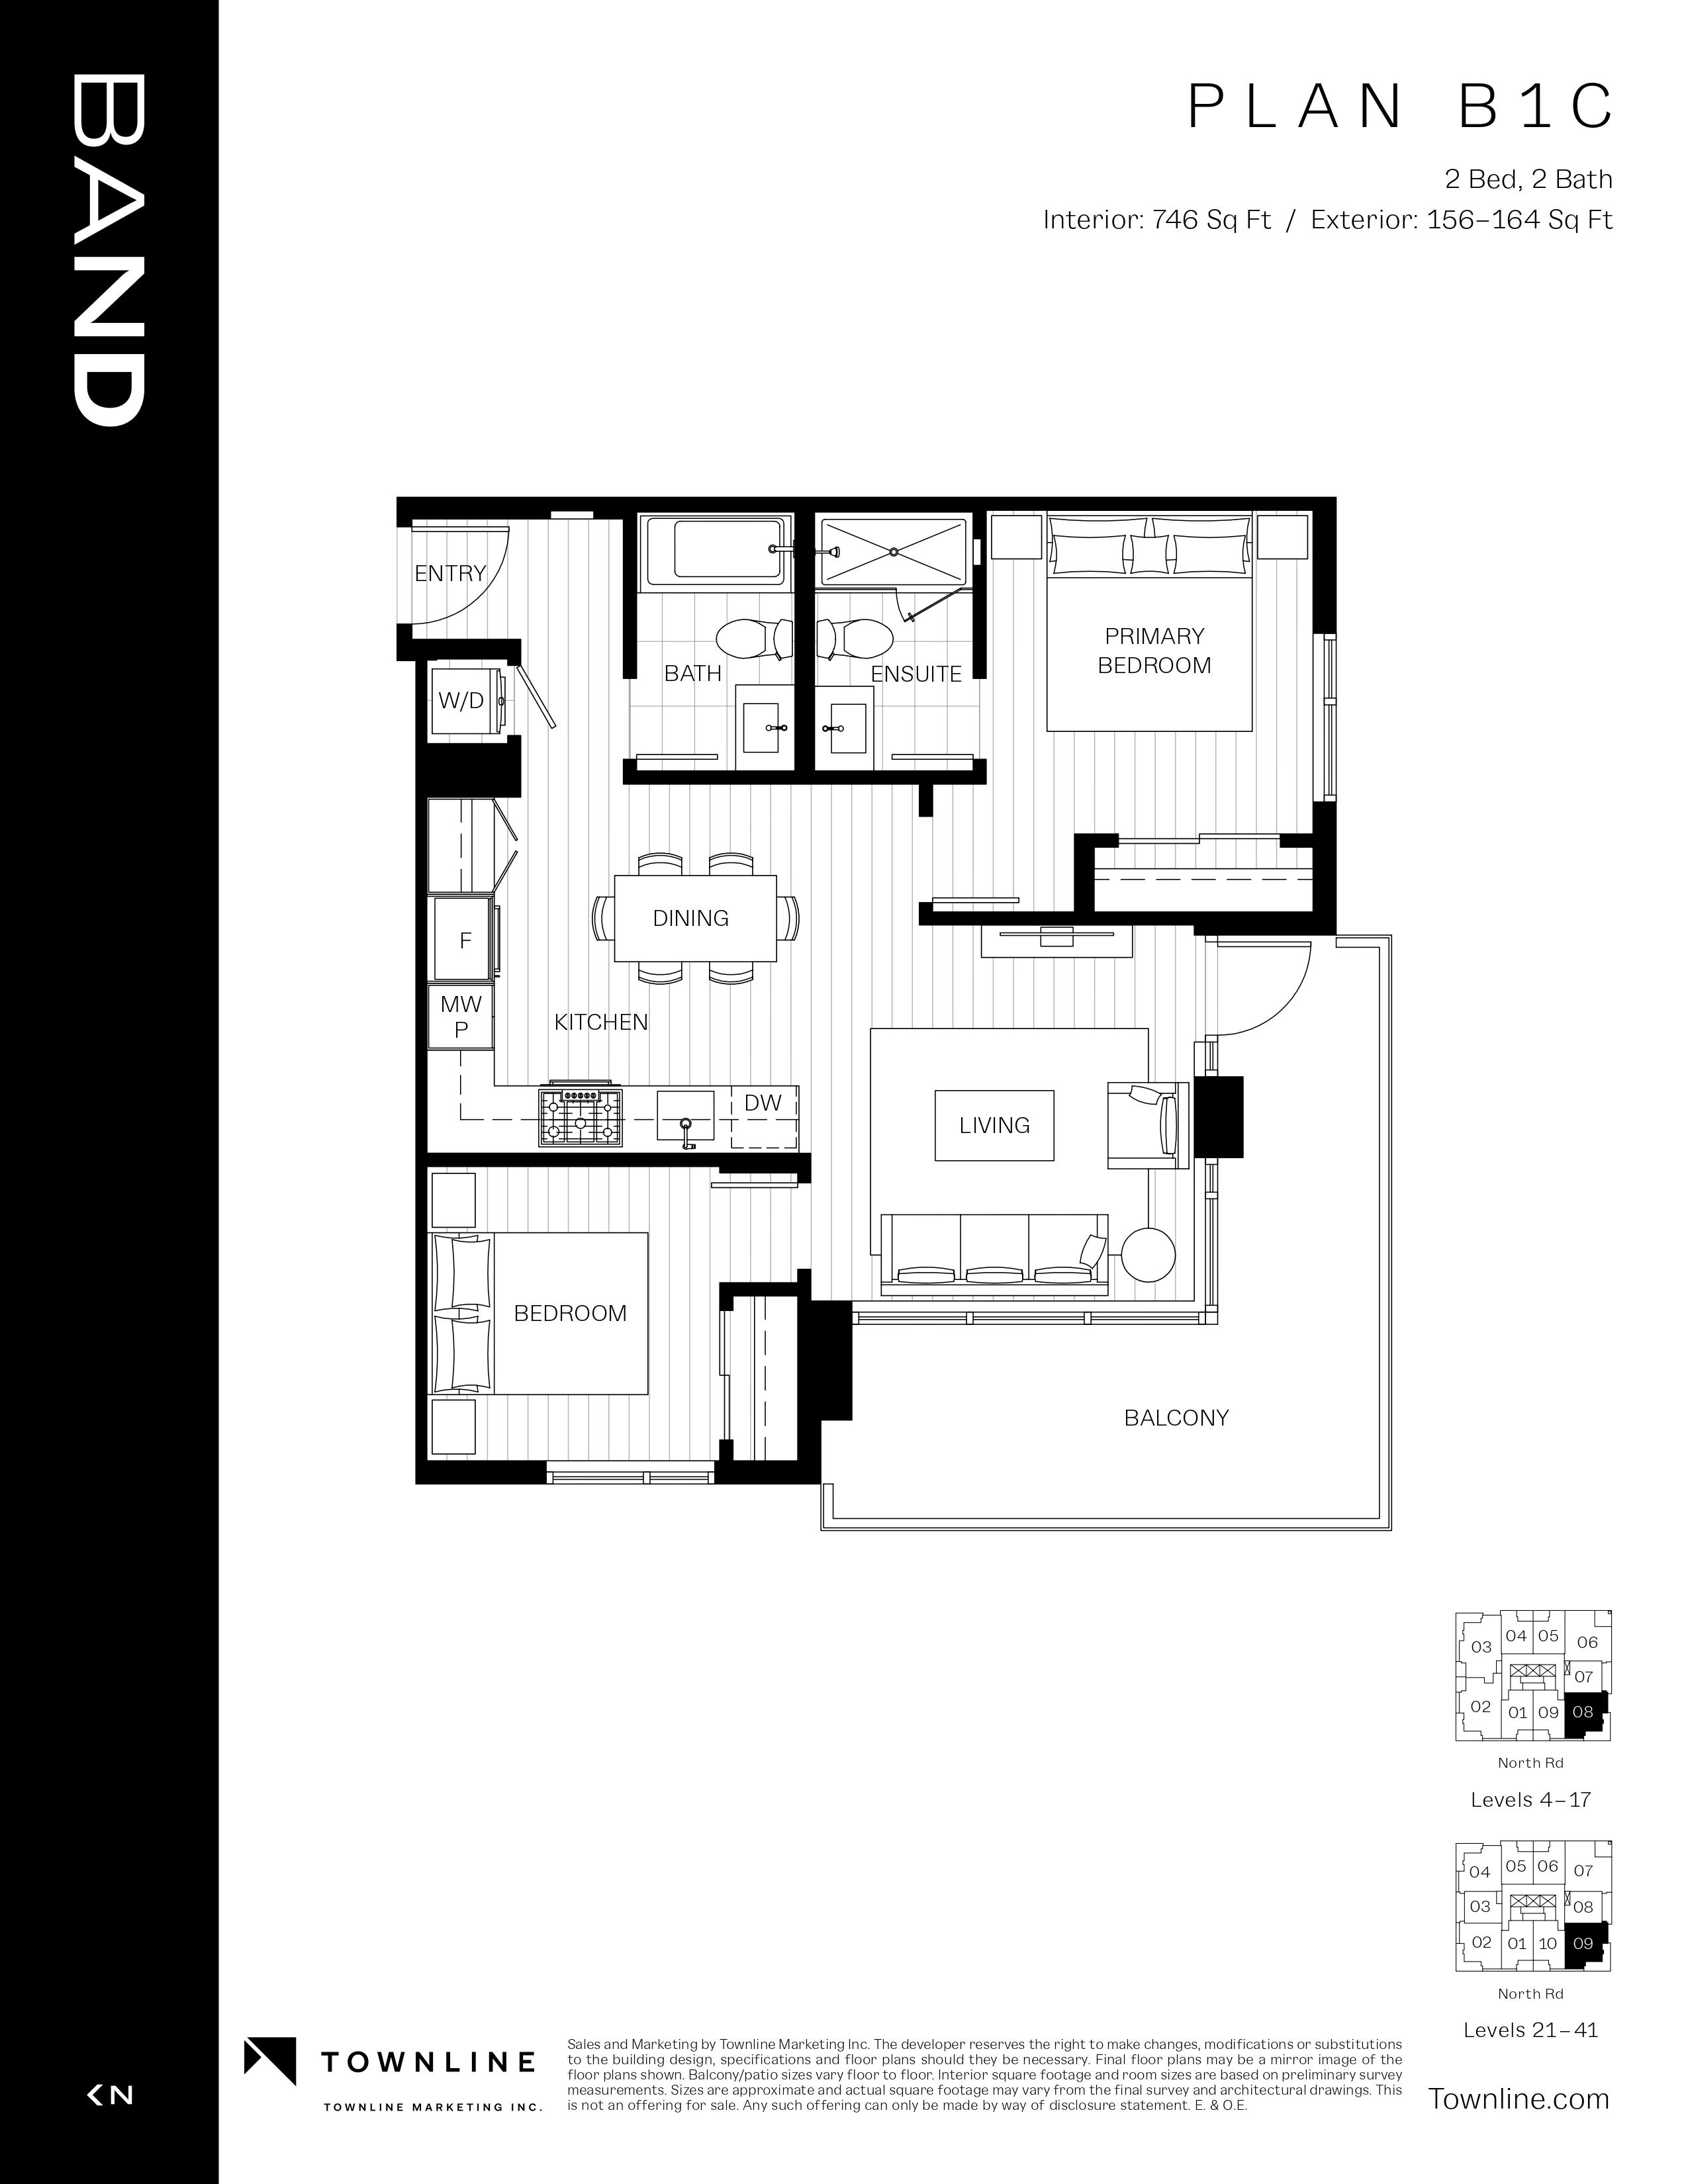  Floor Plan of Band Condos with undefined beds